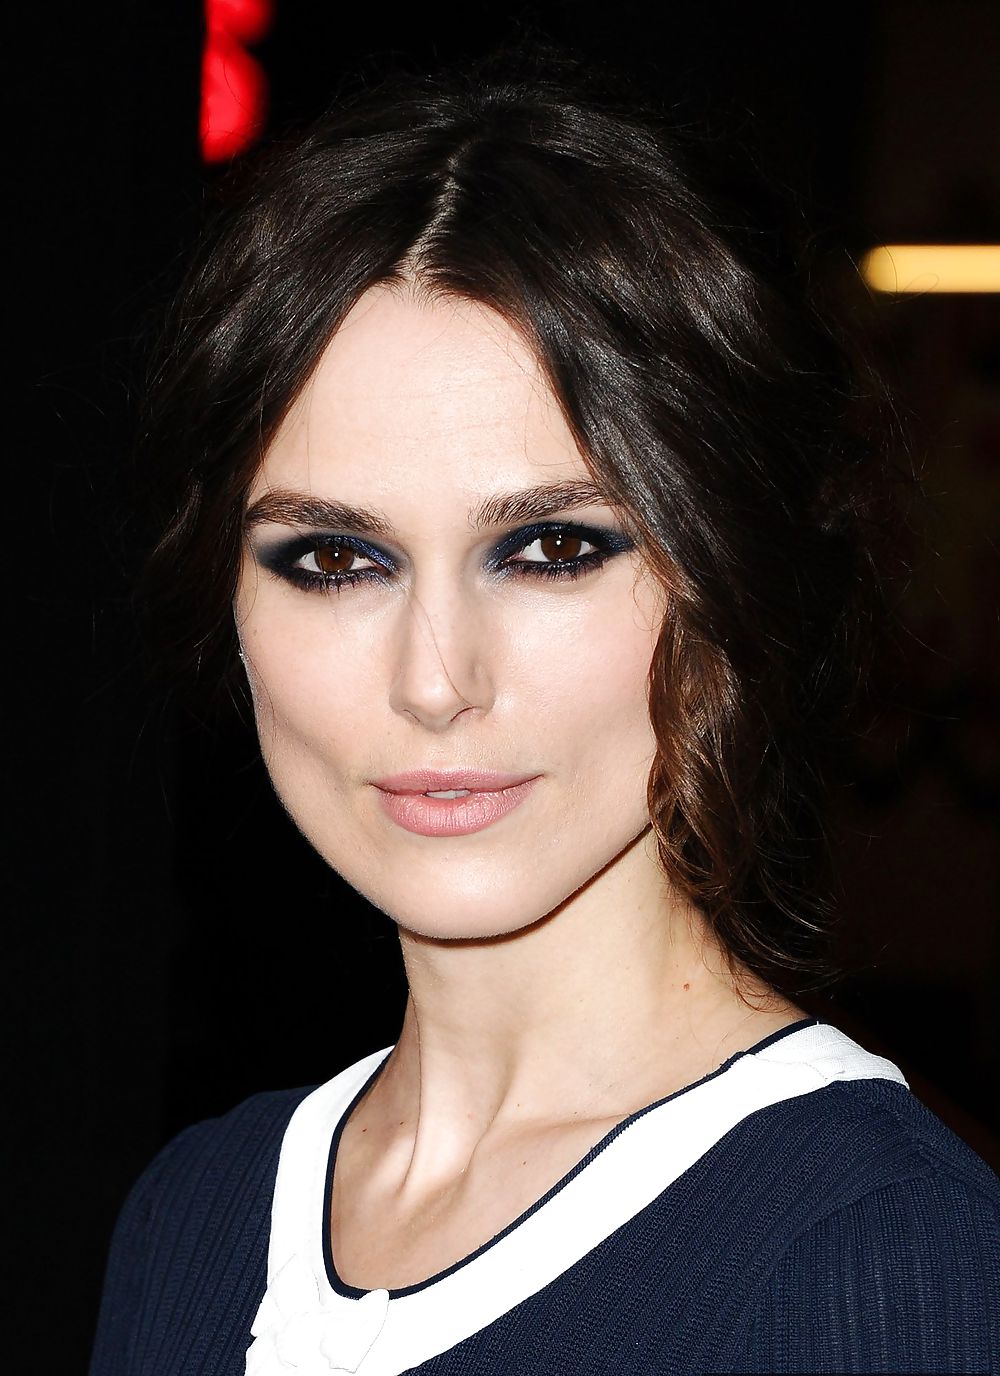 Keira Knightley The Royal Lady of England #35650277